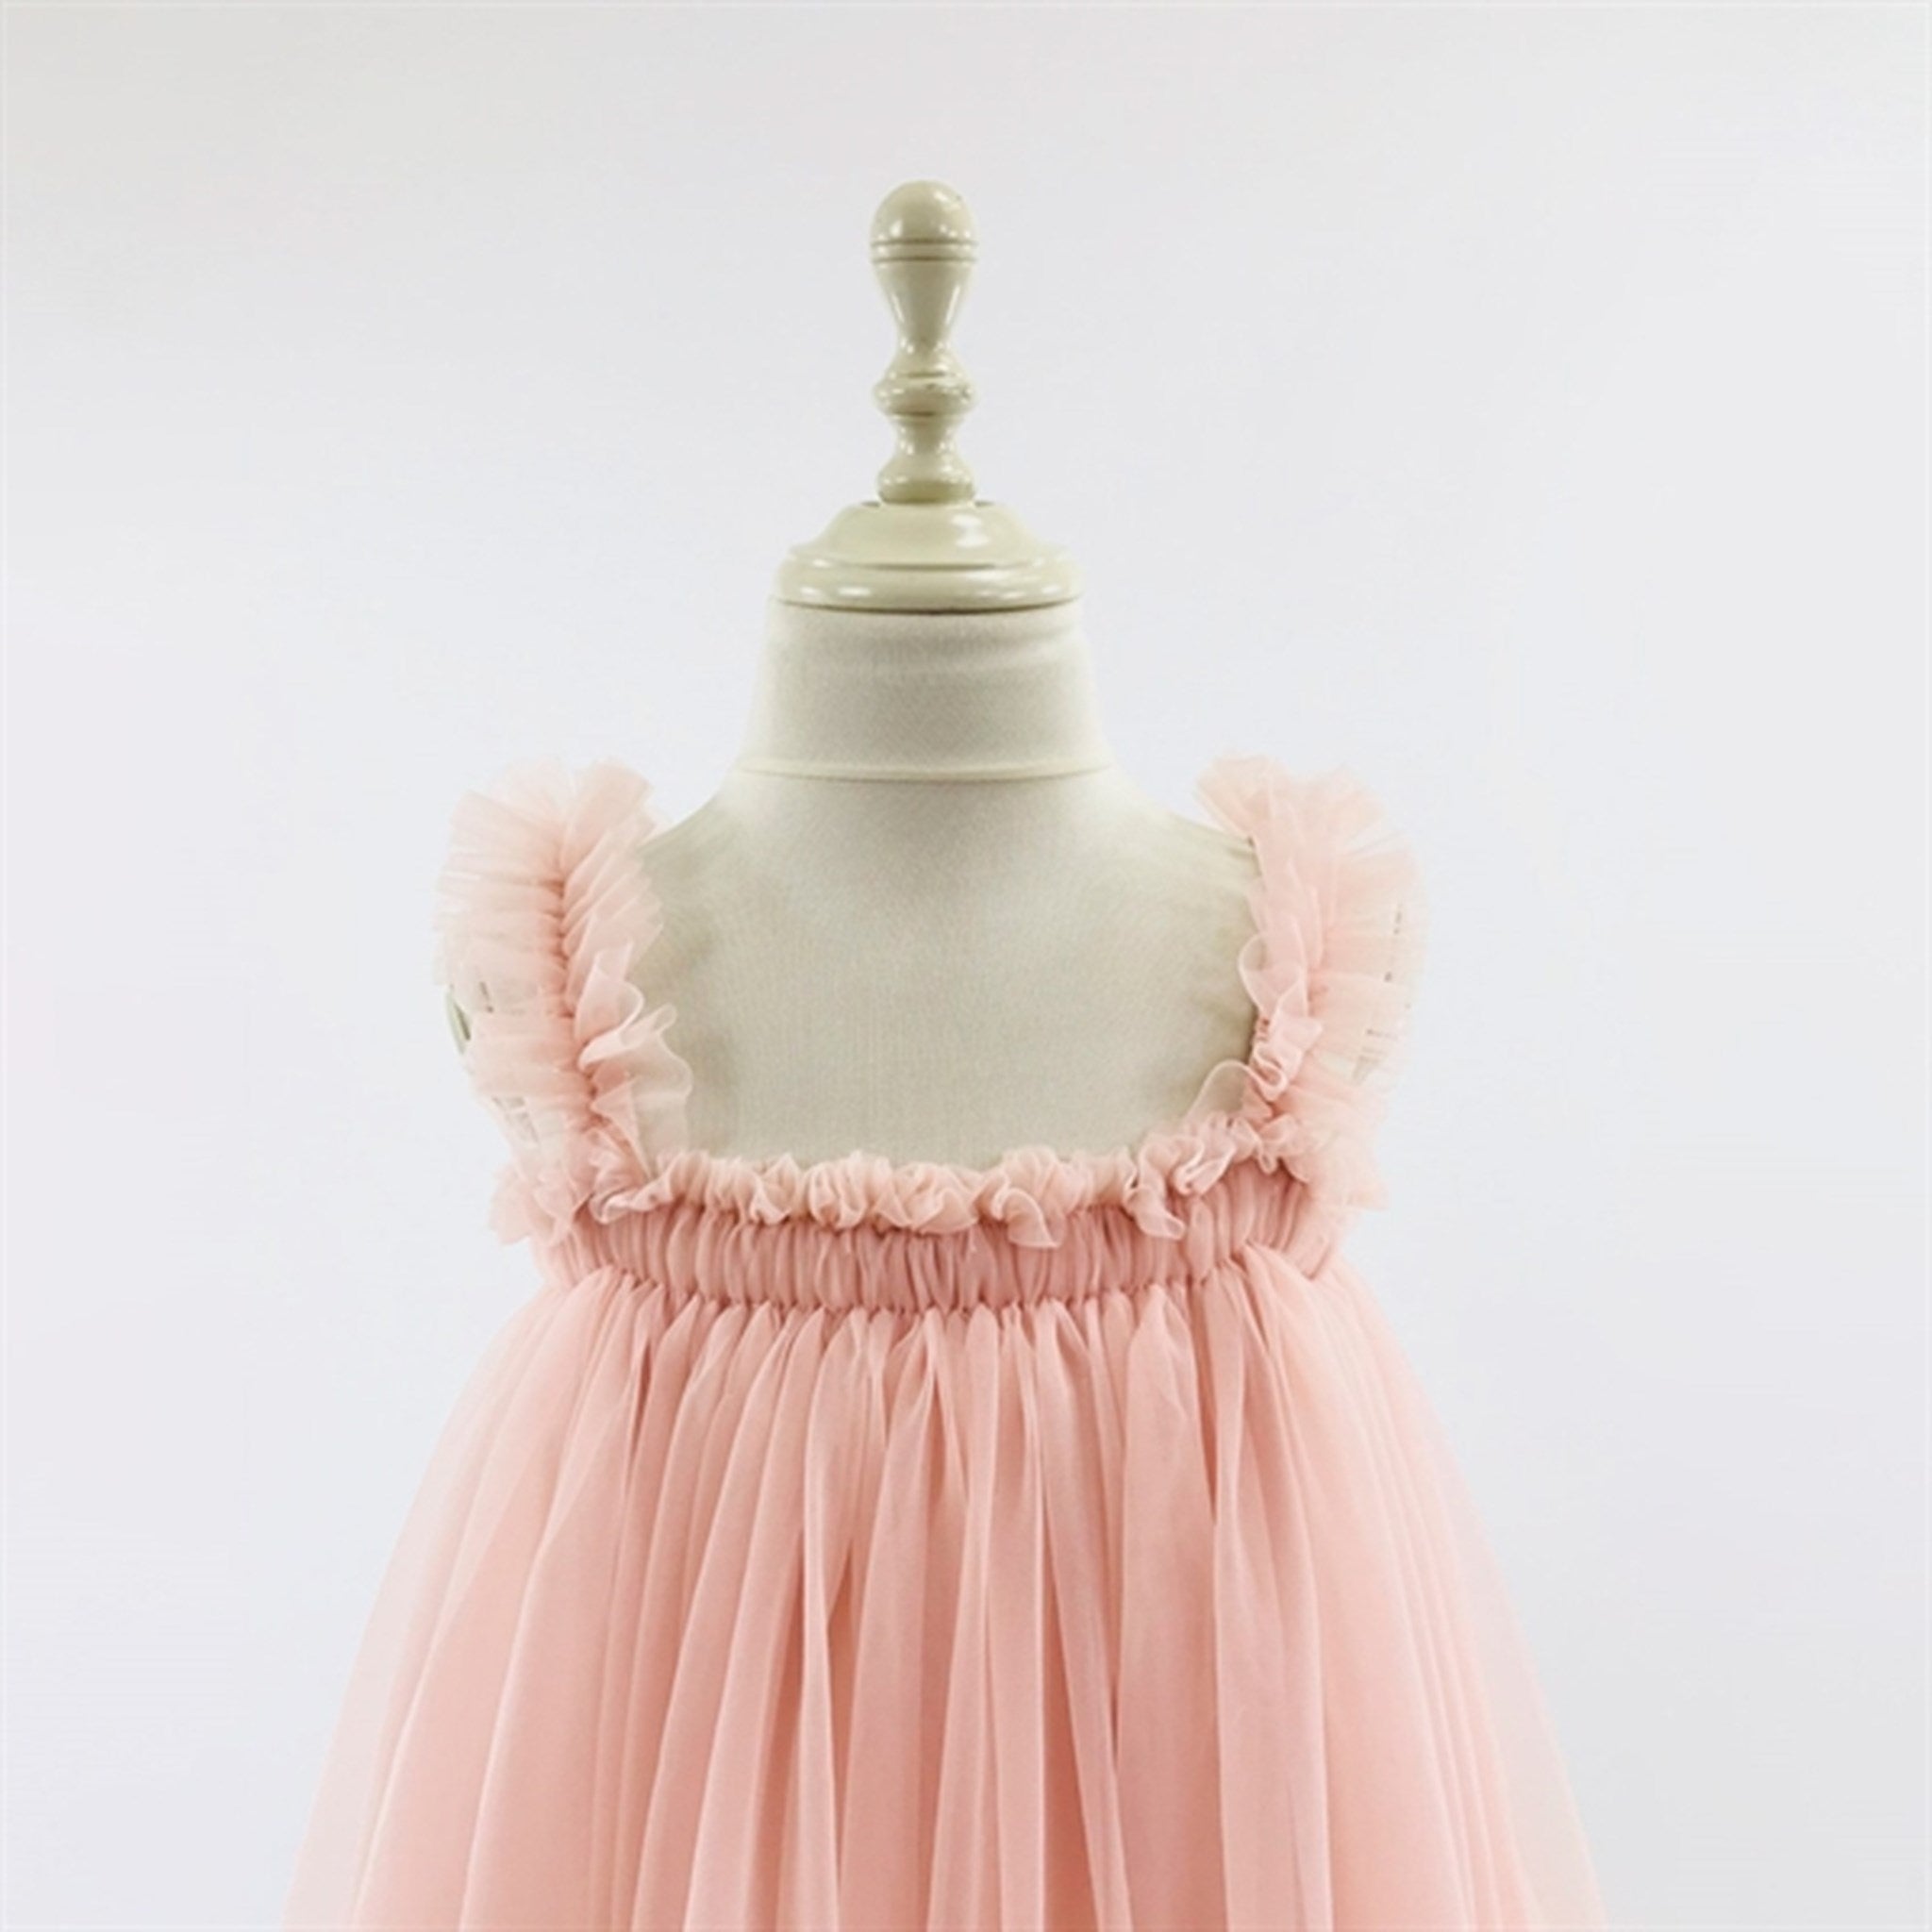 Dolly by Le Petit Tom Tutu Klänning Beach Cover Up Ballet Pink 2